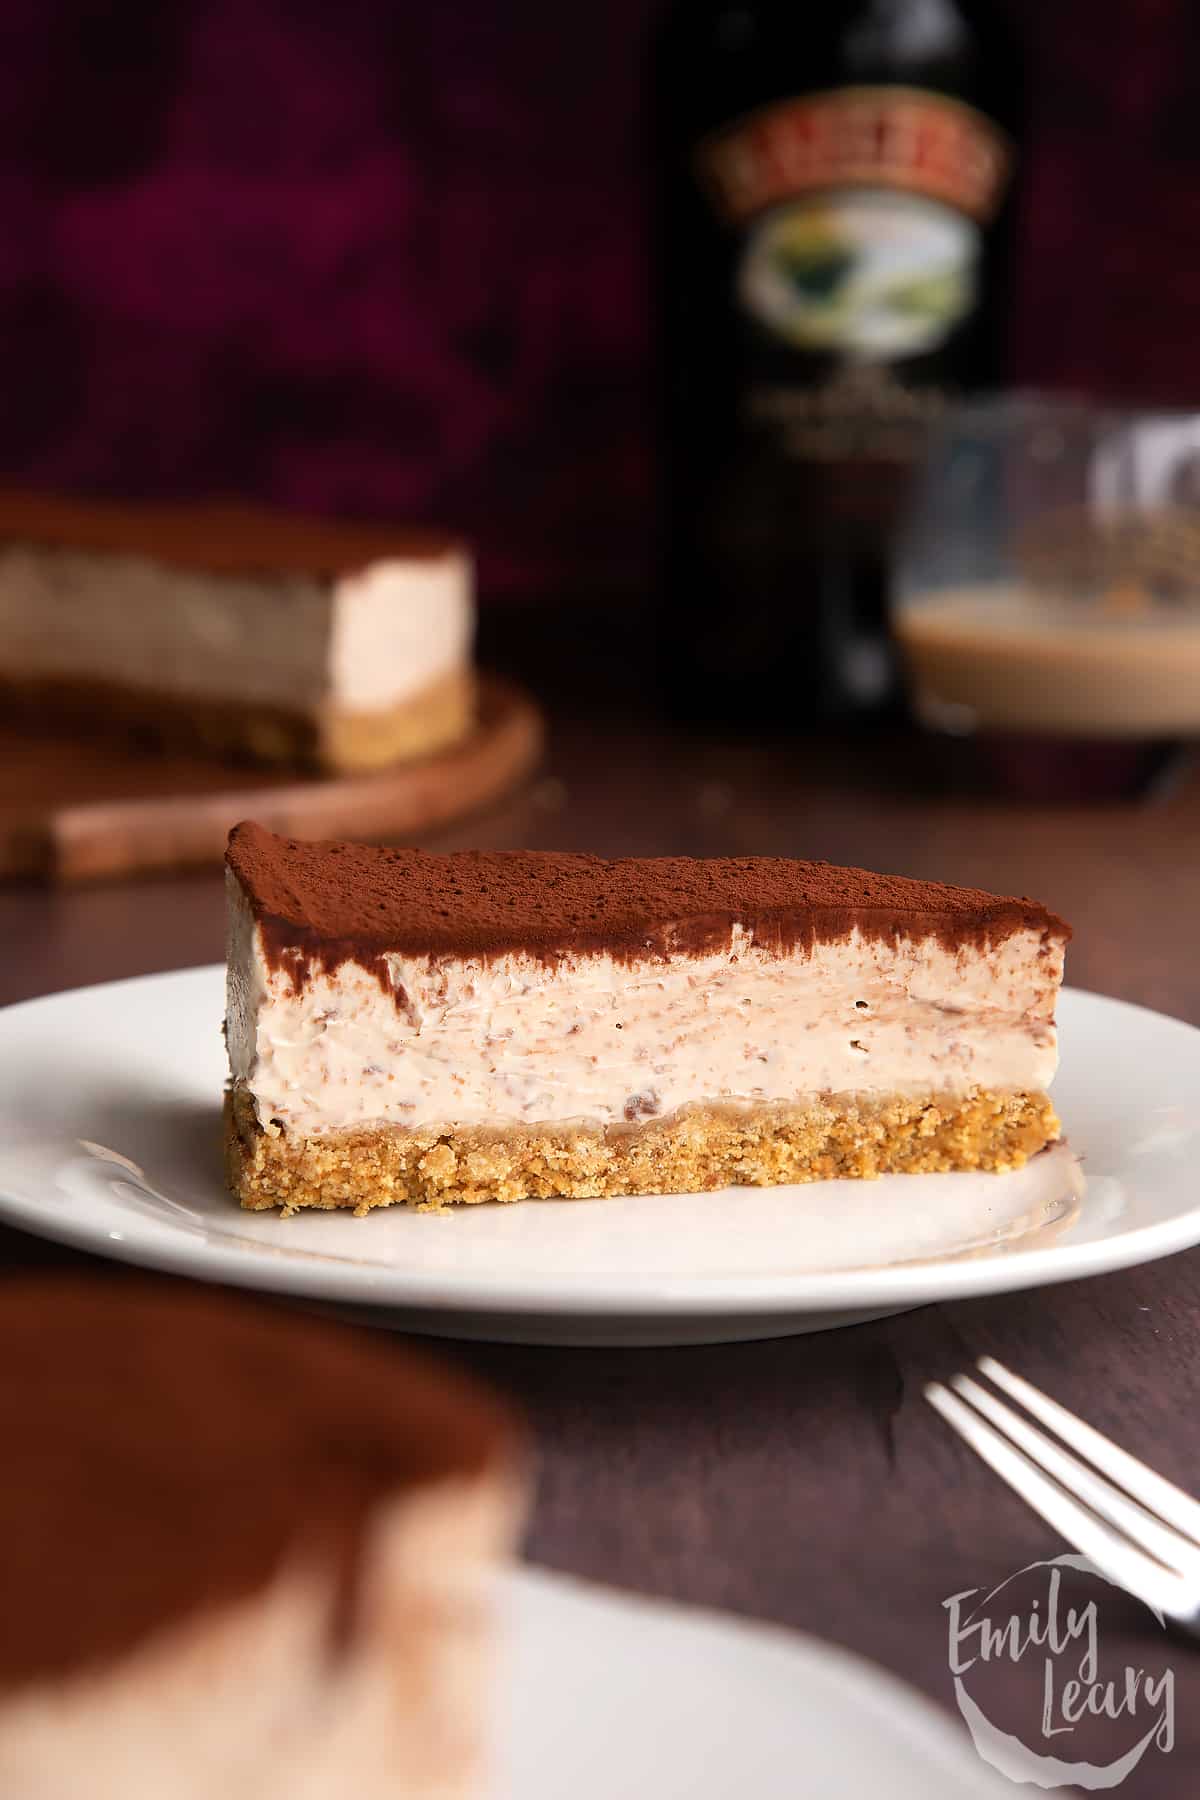 Slice of Baileys cheesecake topped with cocoa on a white plate. More cheesecake and a bottle of Baileys is visible in the background.